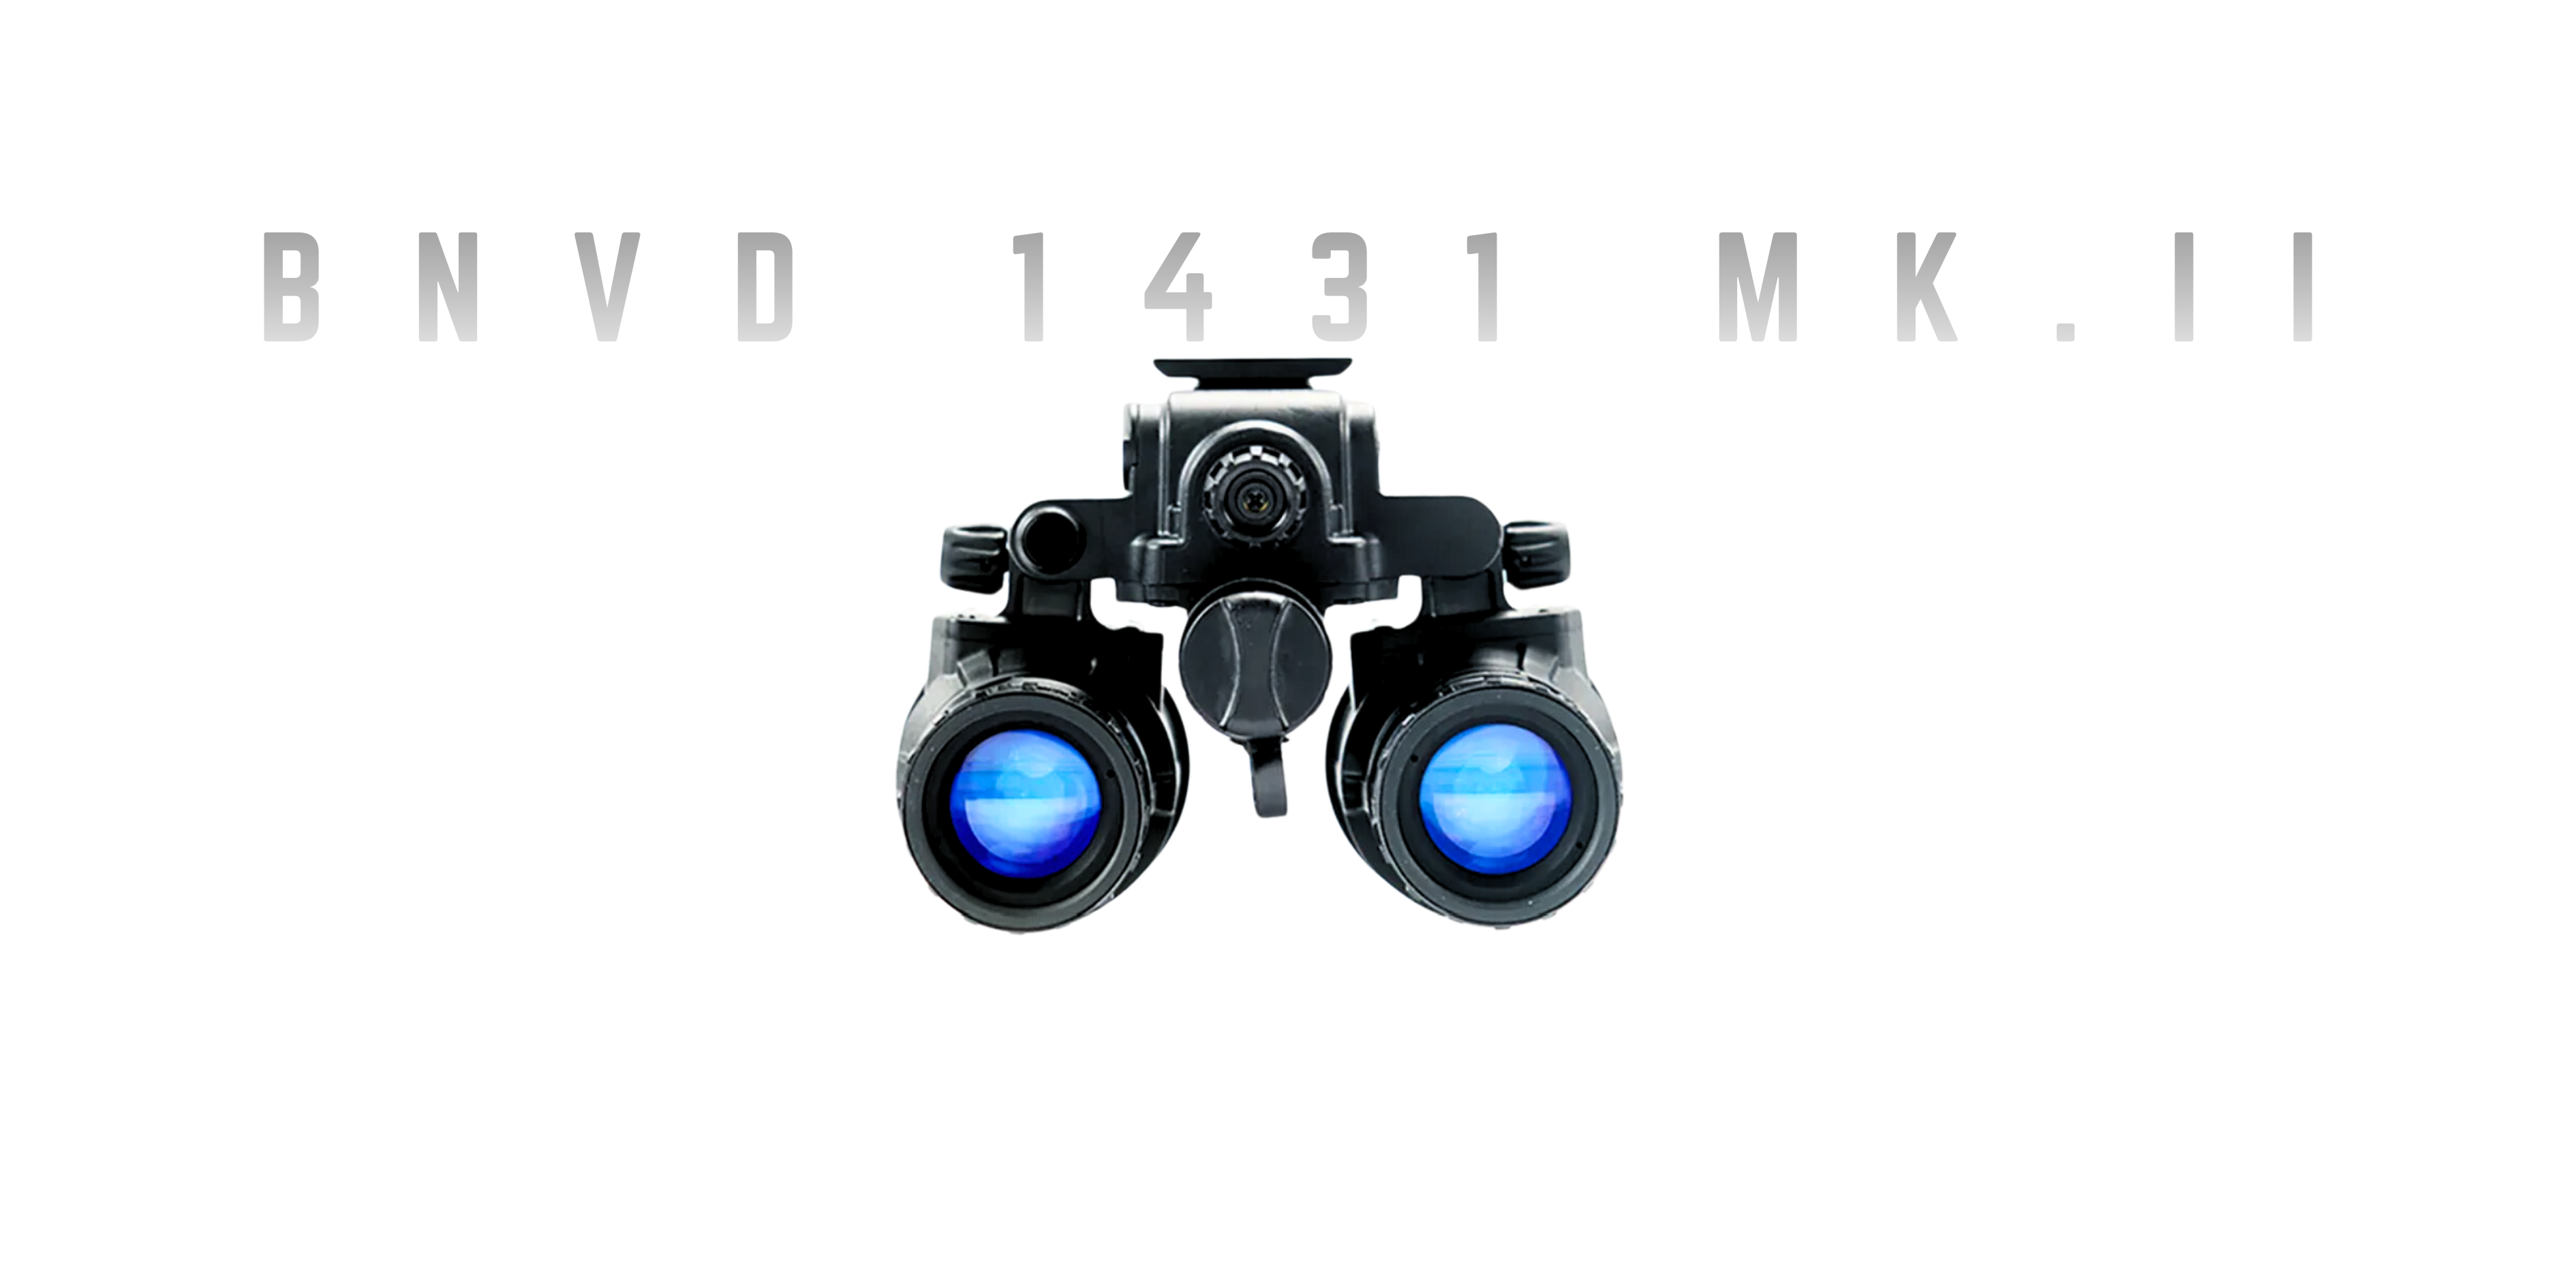 BNVD 1431 MK11 night vision binoculars for soldiers, law enforcement and rescue operations.